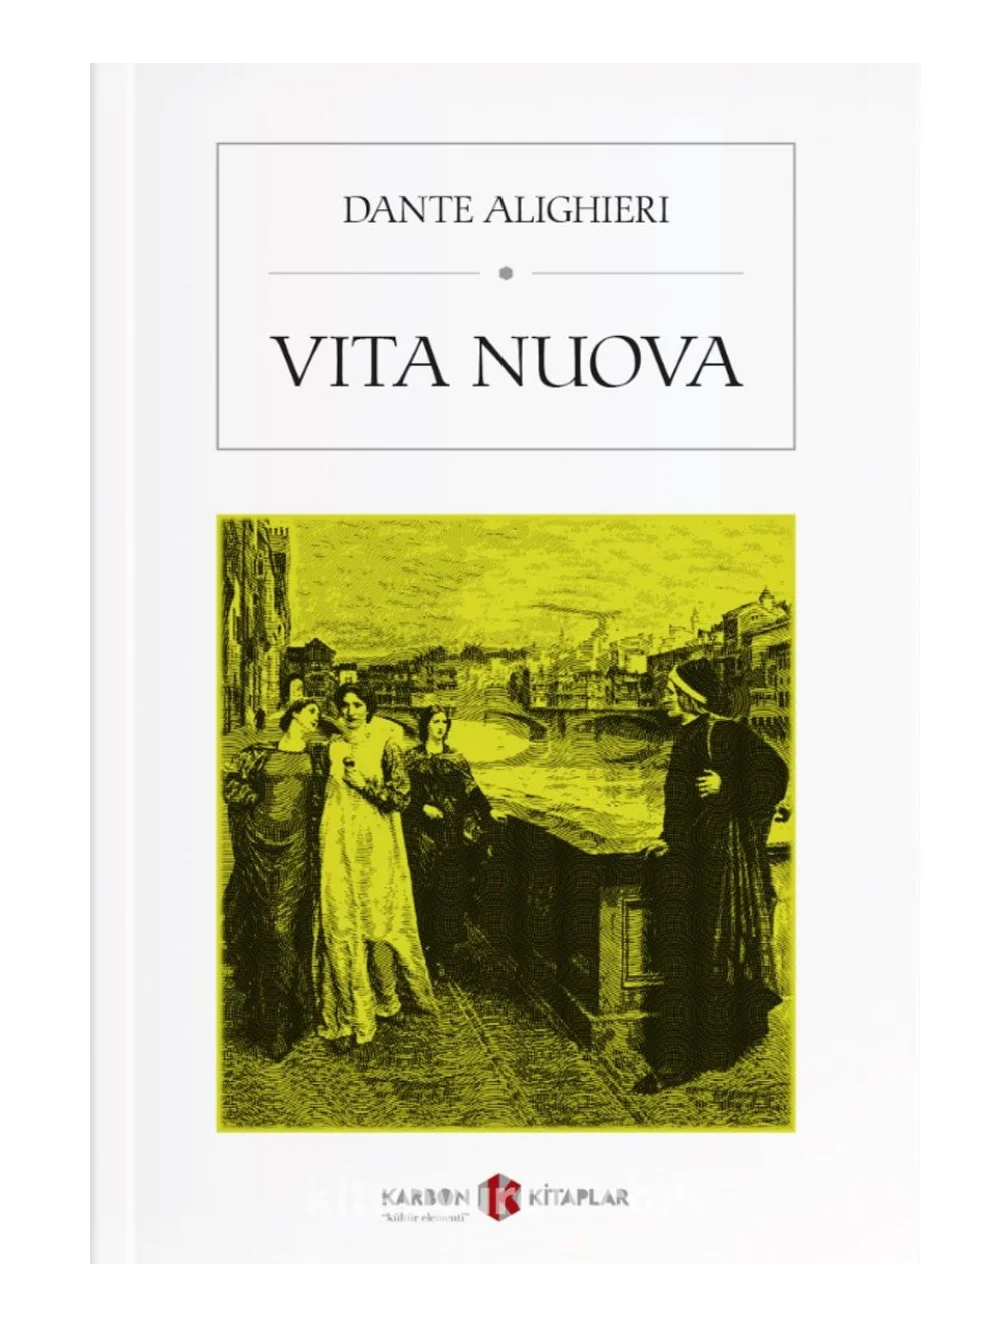 

New life - Dante Alighieri - Italian book - The best classics of world literature - Nice gift for friends and Italian learners